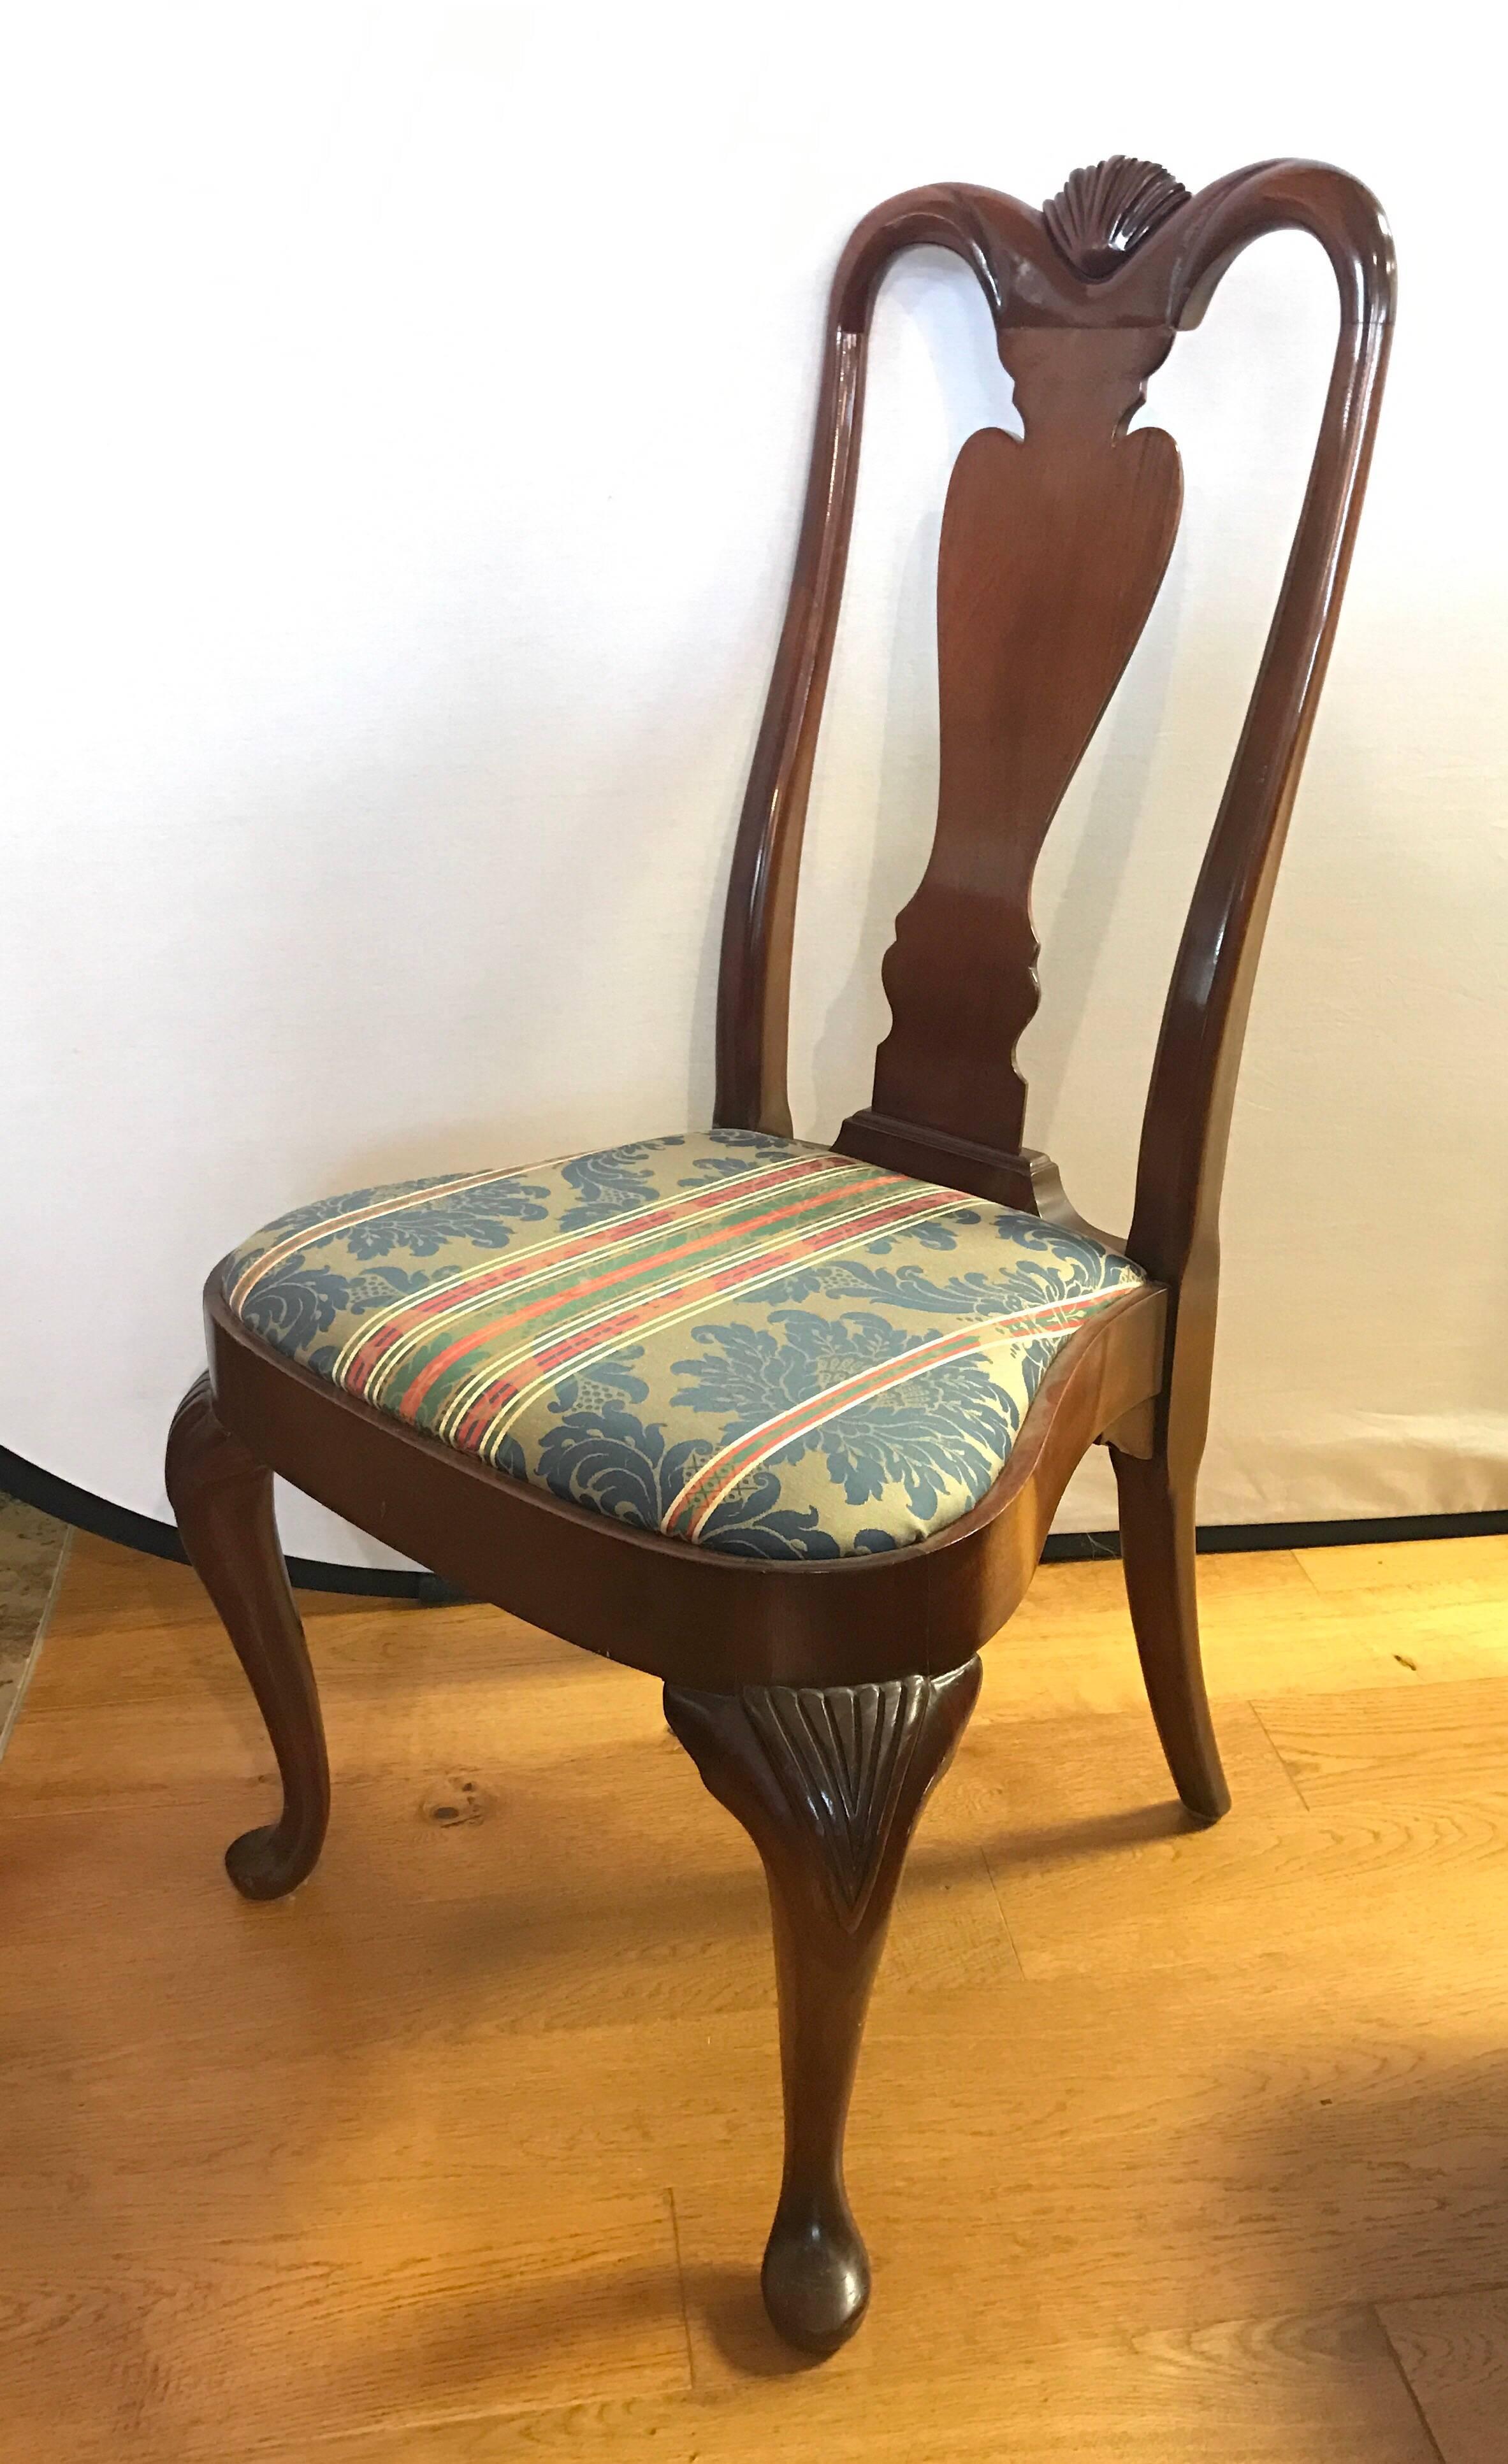 Set of six Queen Anne mahogany dining chairs with carved scallop shell detail at top. Drop in seats are upholstered in a luxurious red and blue striped damask fabric.